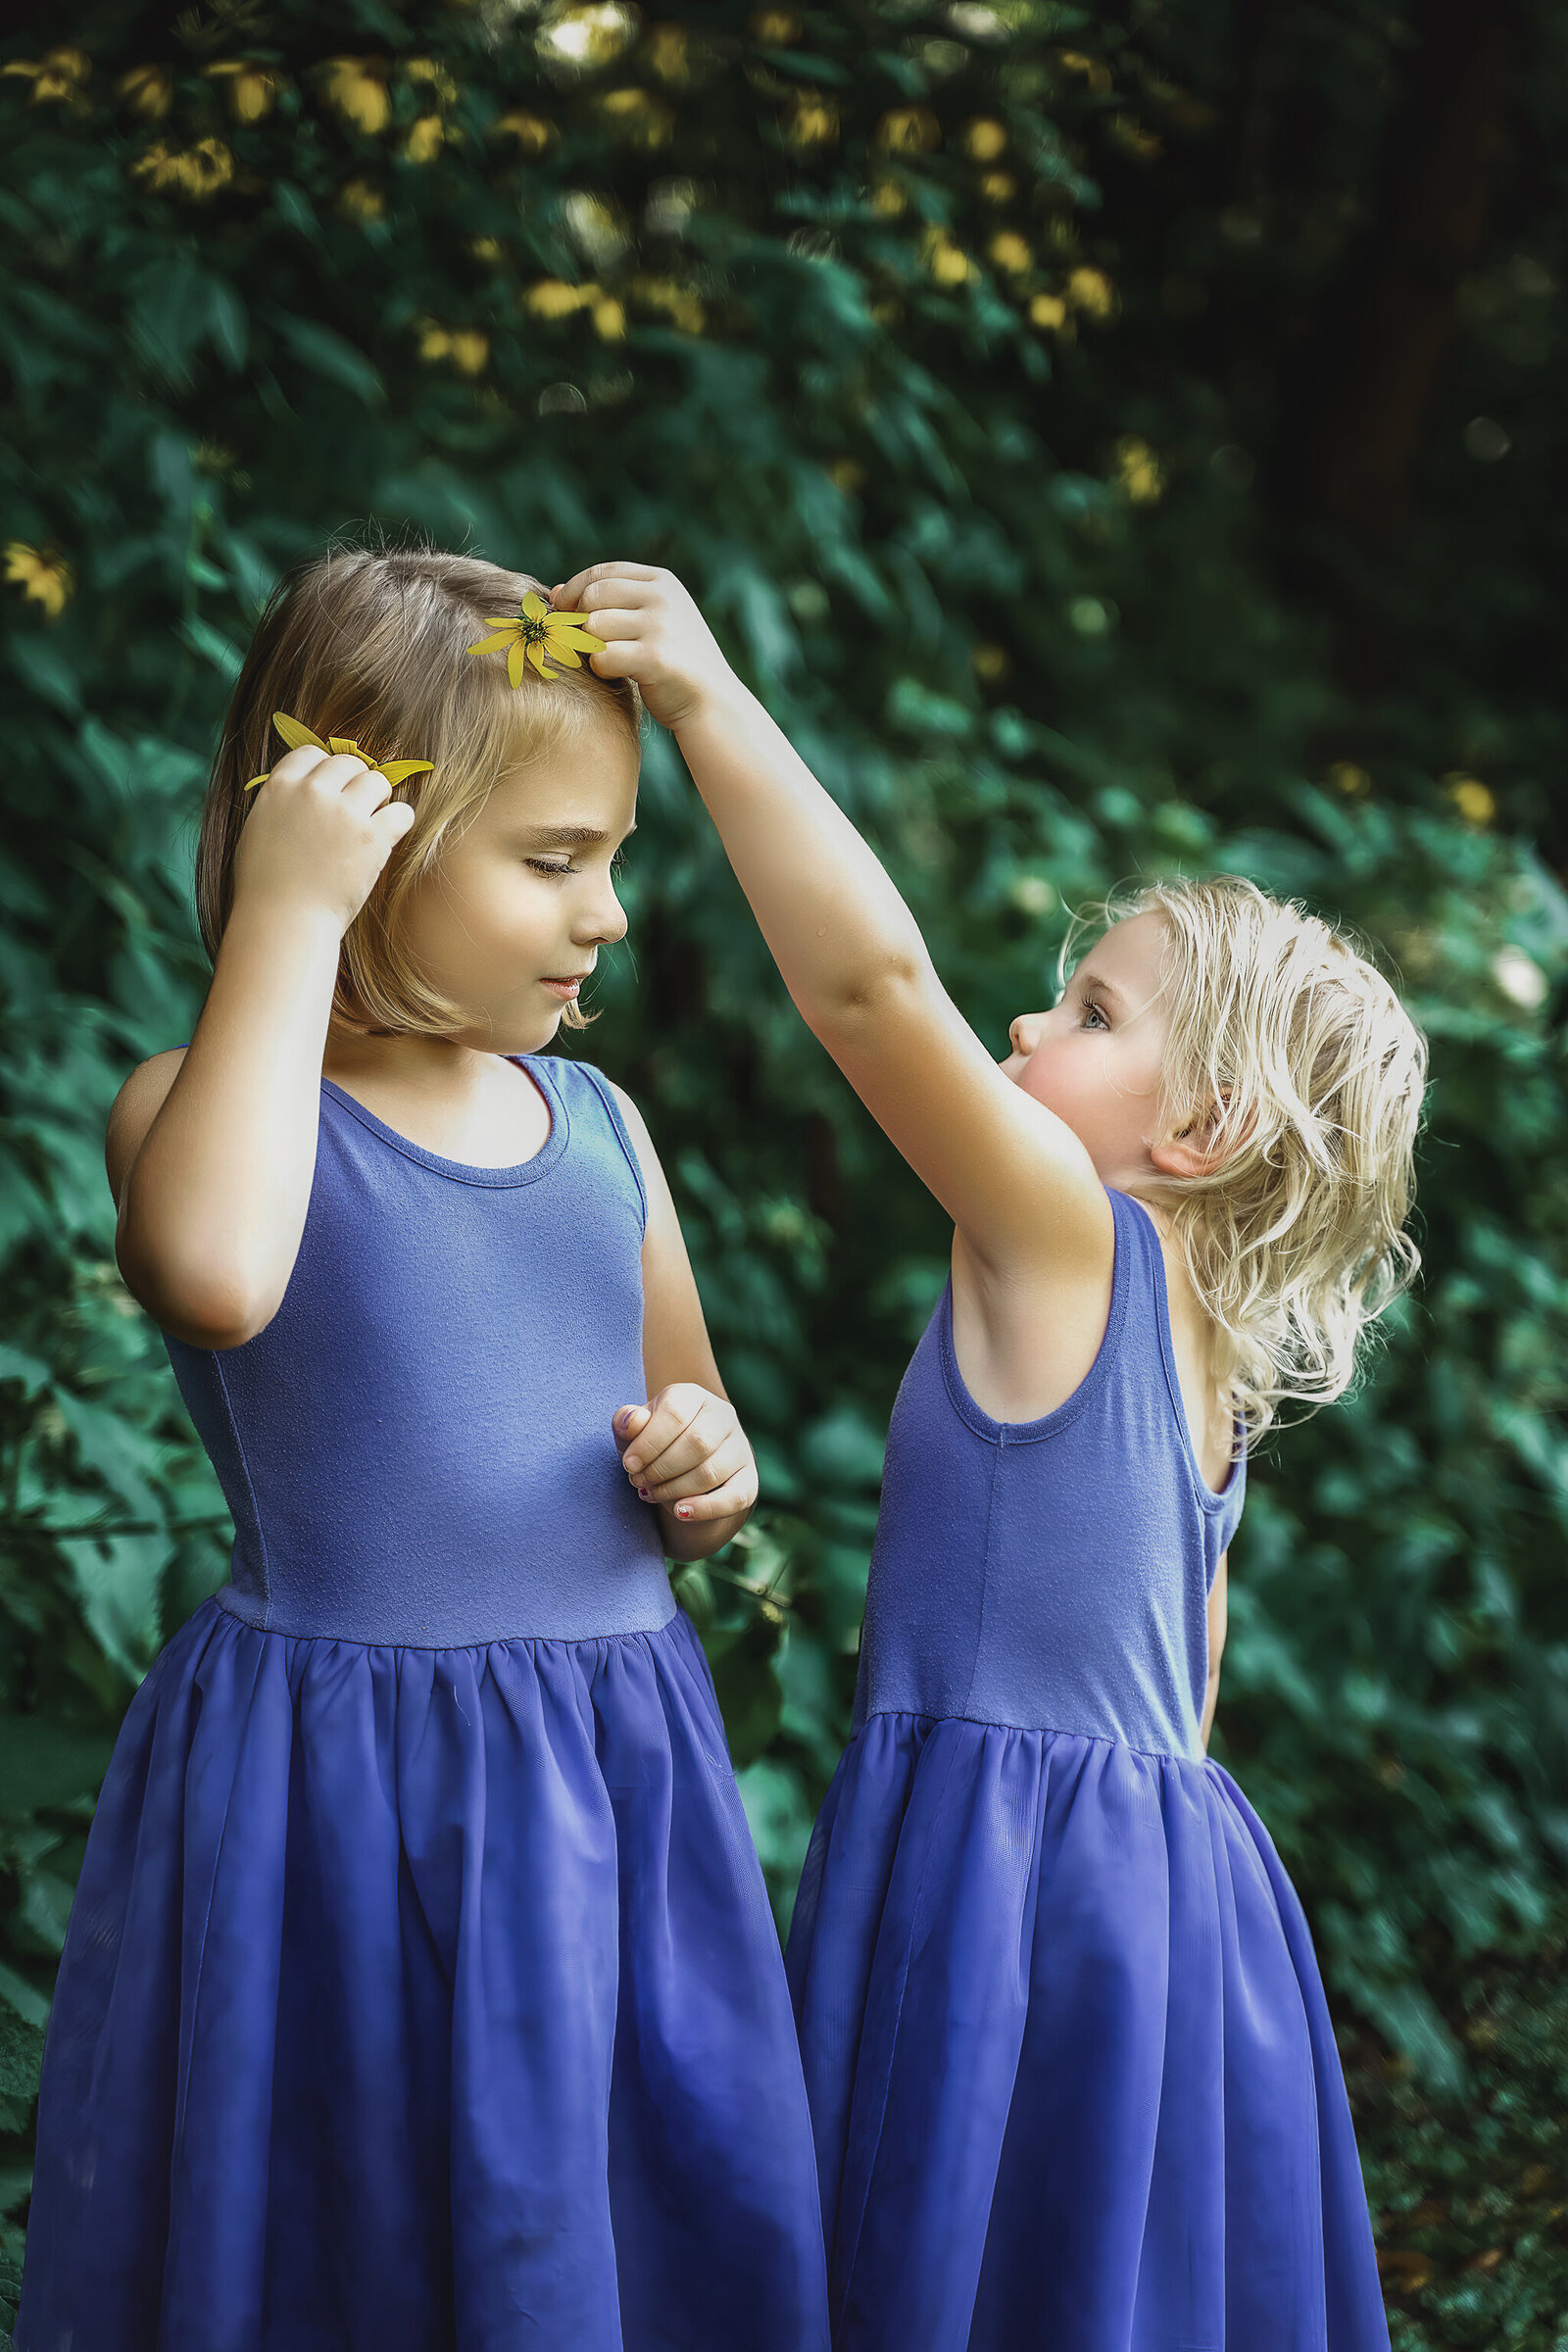 Two girls putting yellow flowers in their hair